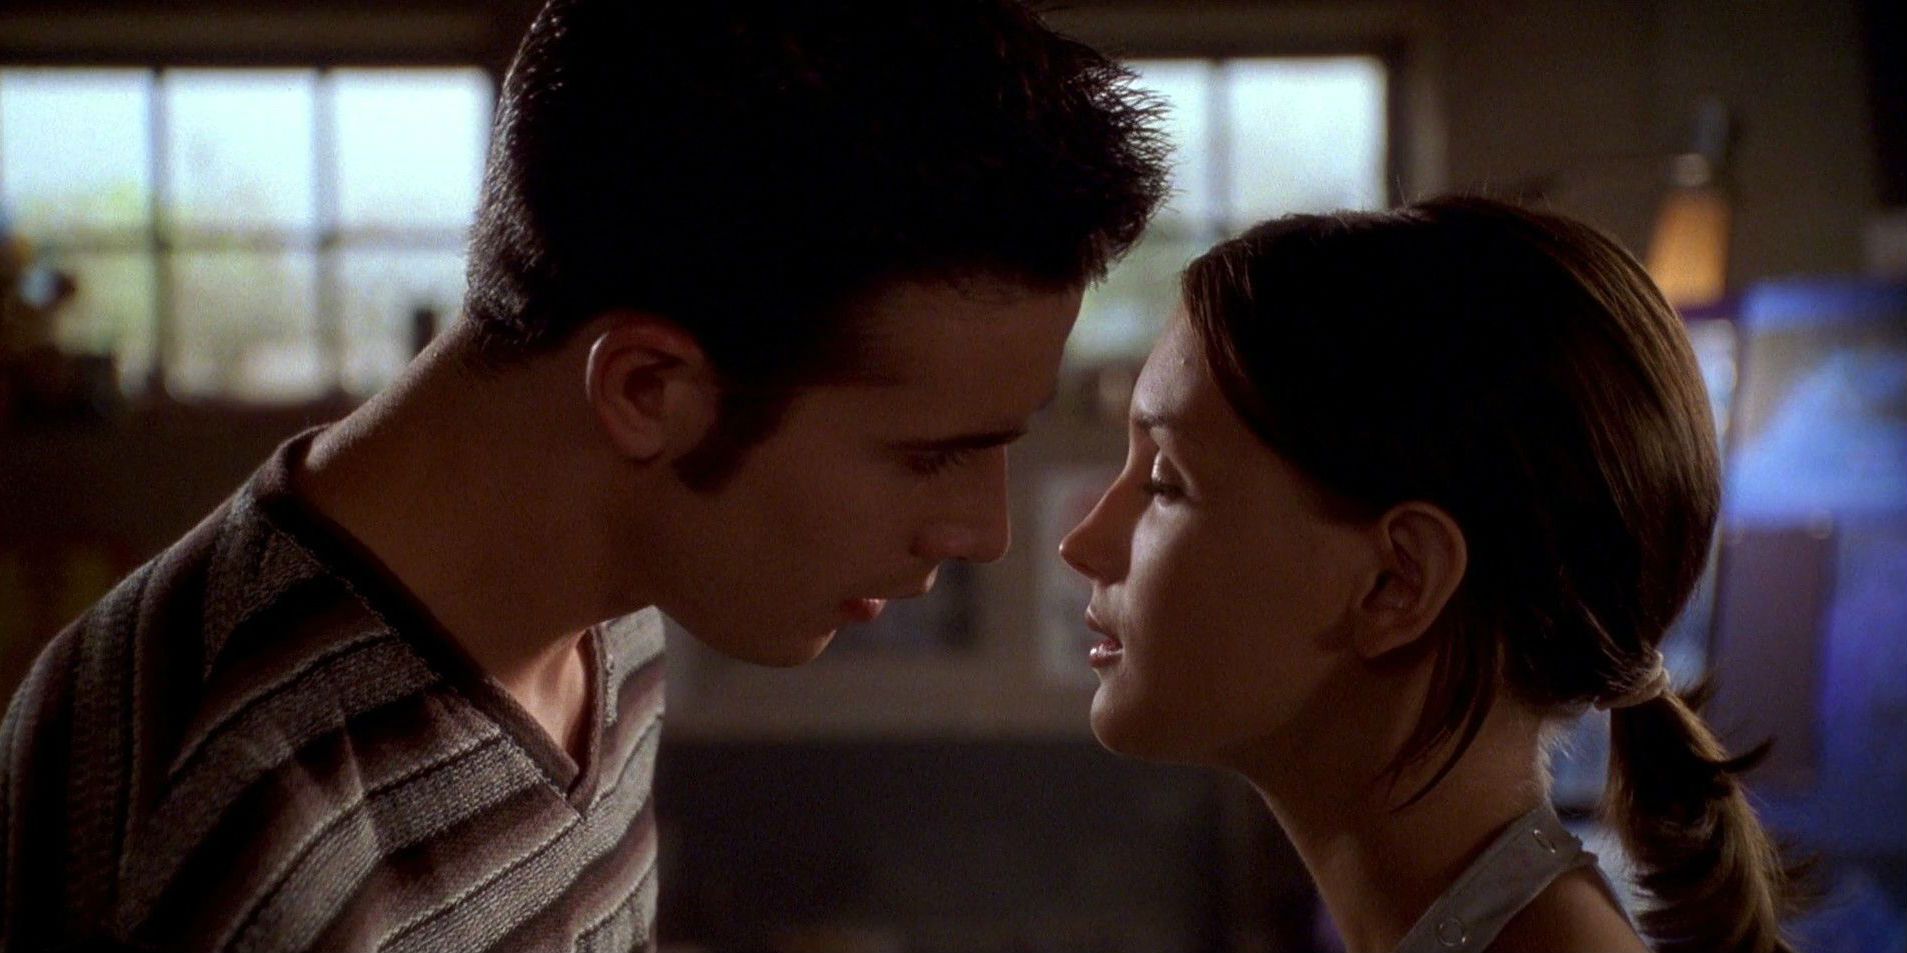 Freddie Prinze, Jr. and Rachael Leigh Cook kissing in She's All That